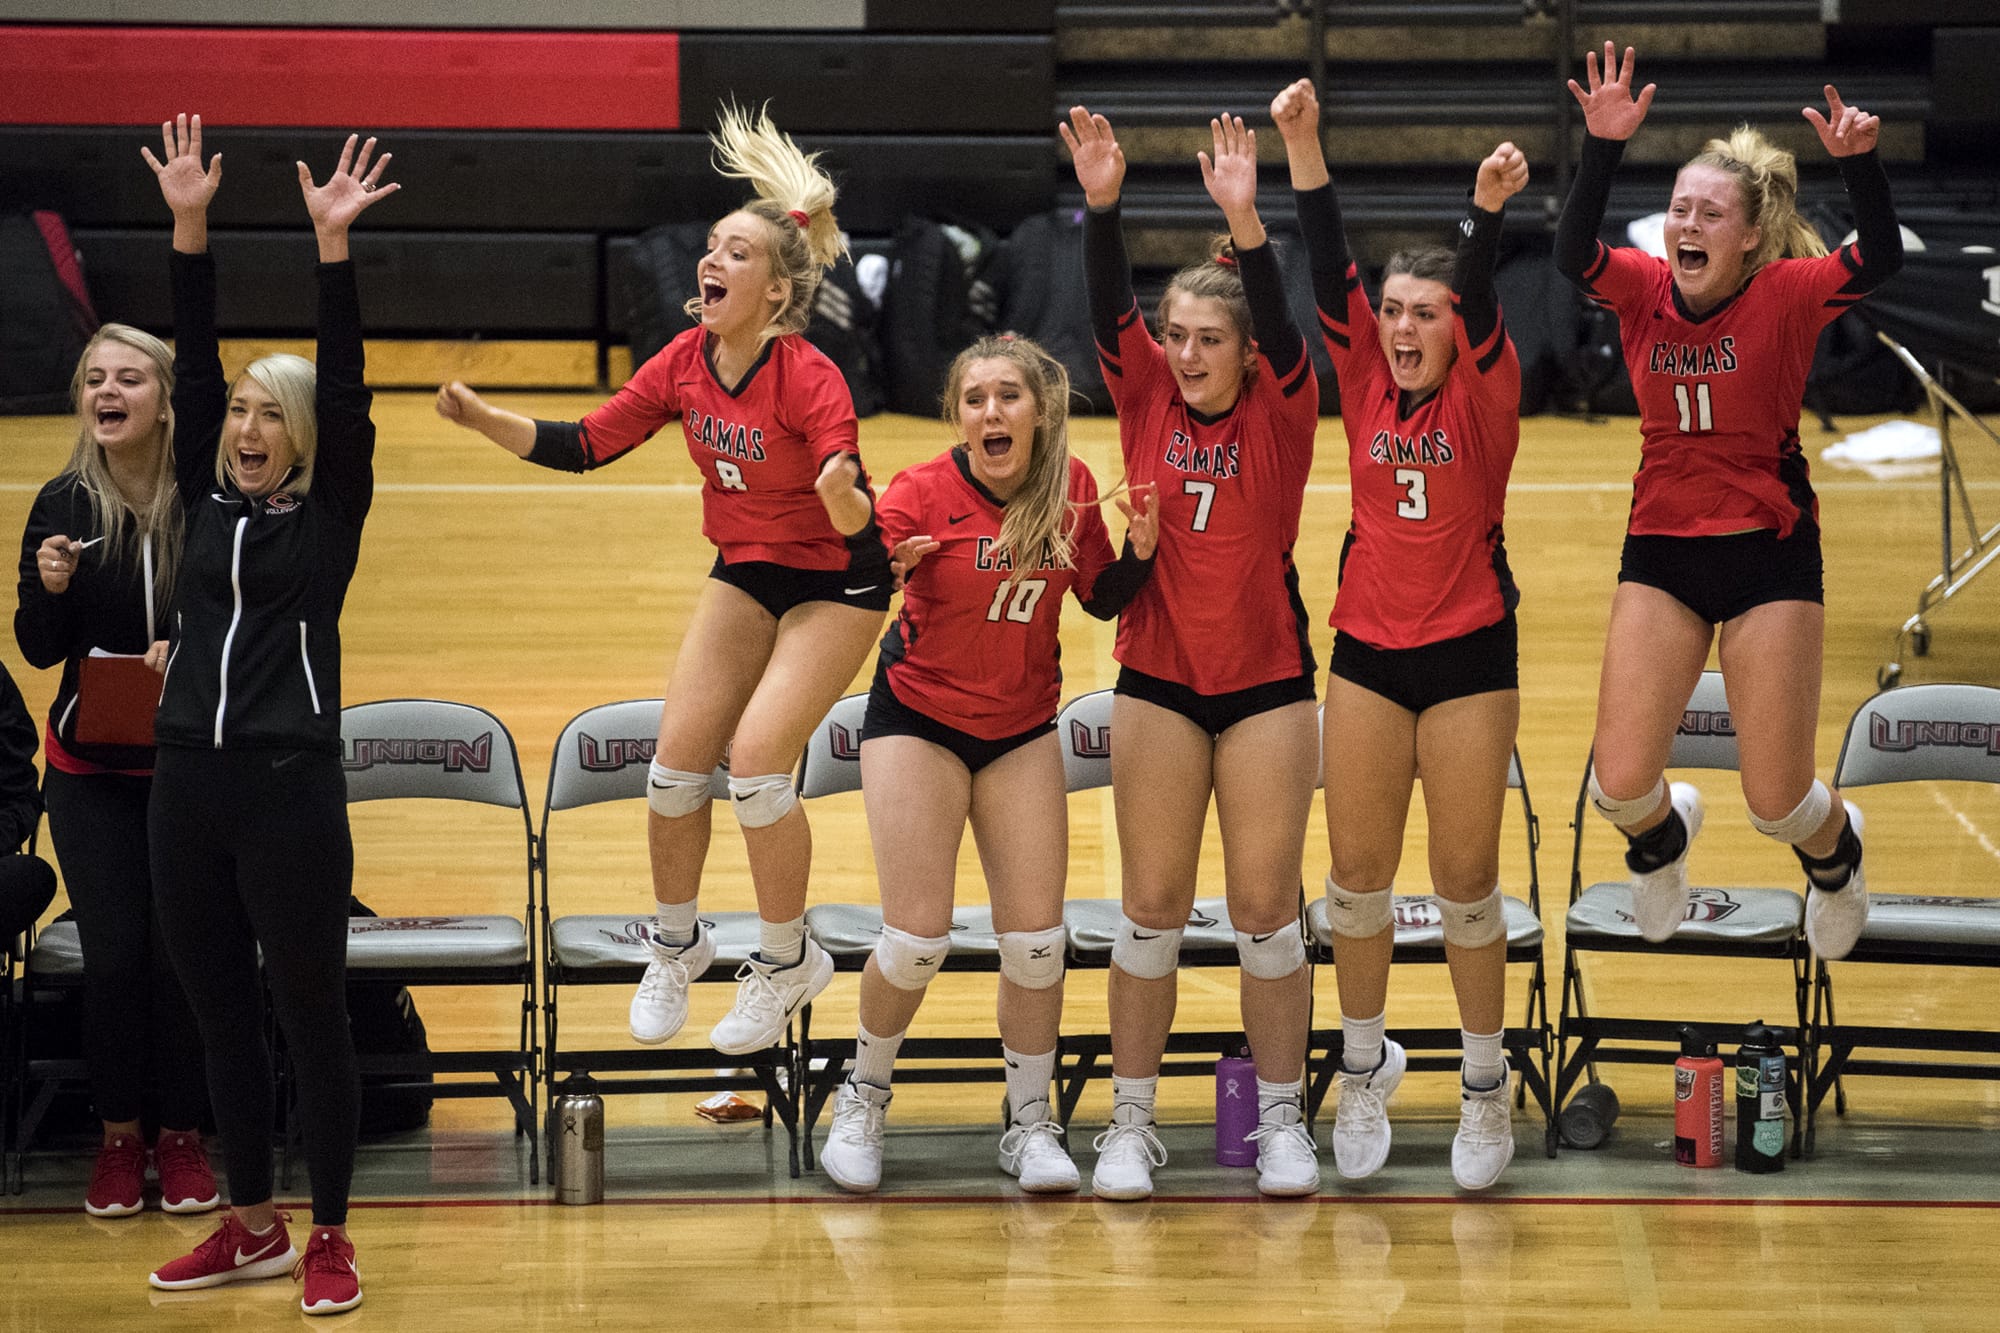 Camas celebrates their final point to win in four sets during the game at Union High School in Camas on Thursday, Sept. 20, 2018.